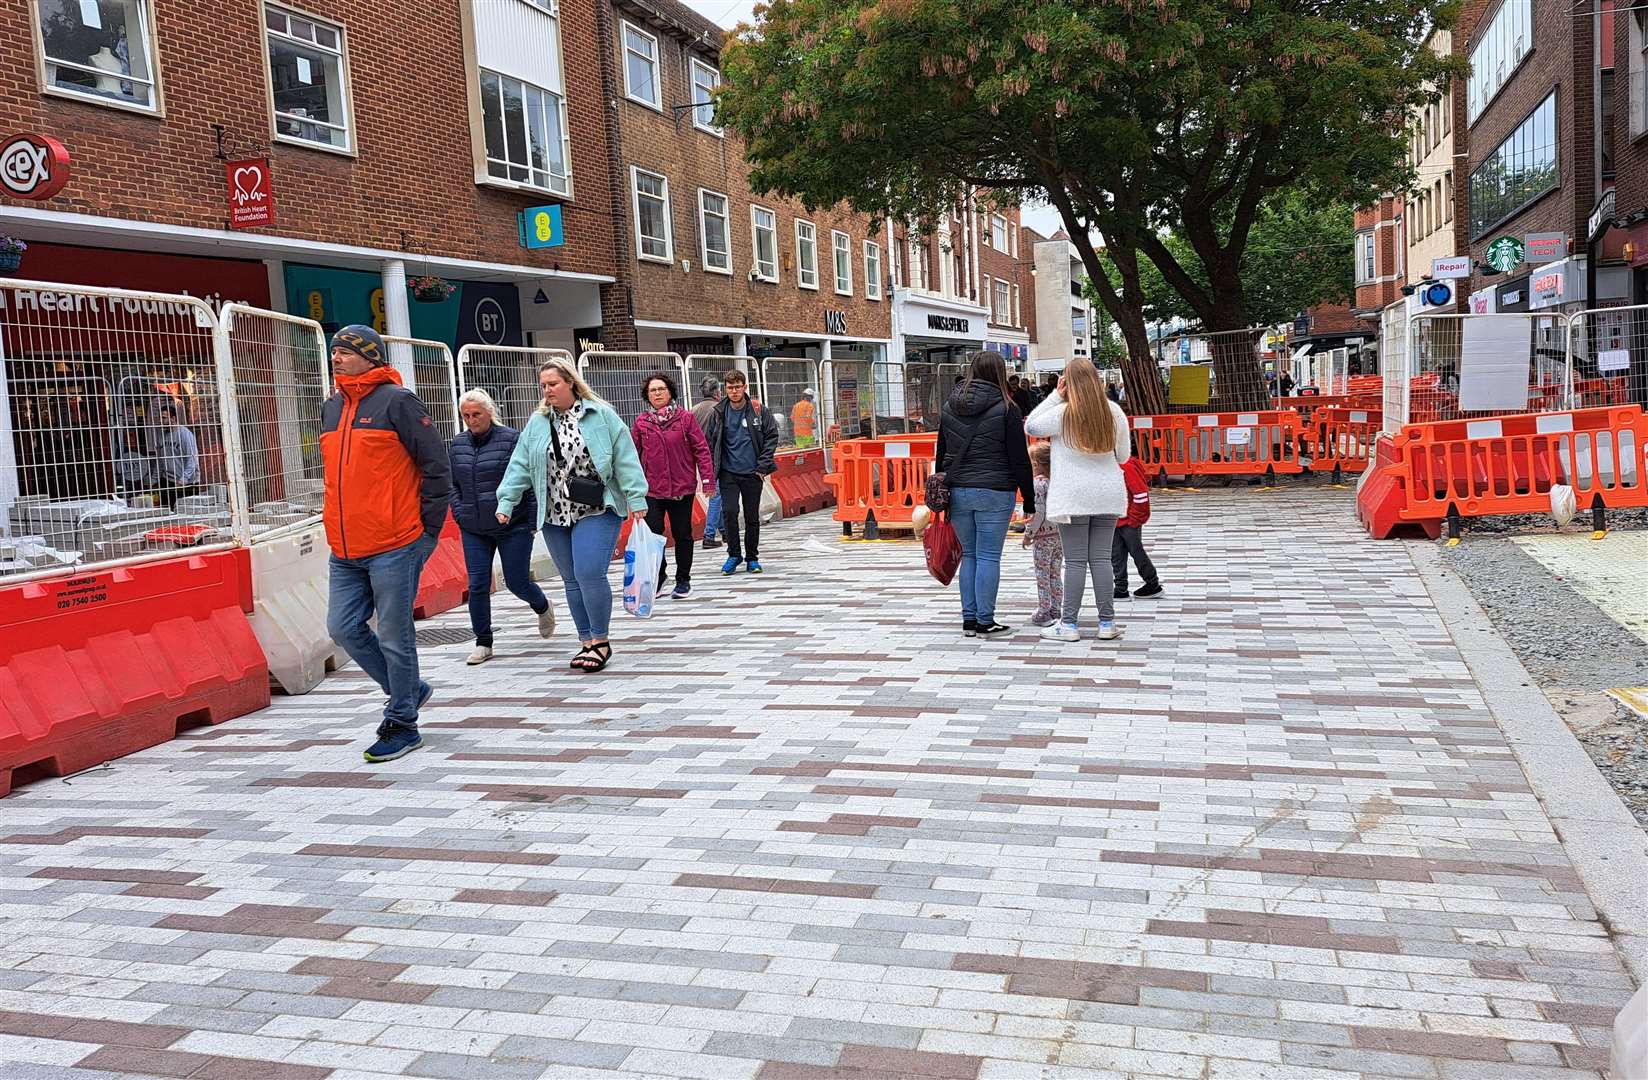 Concern had been raised about the colourful paving used in St George’s Street